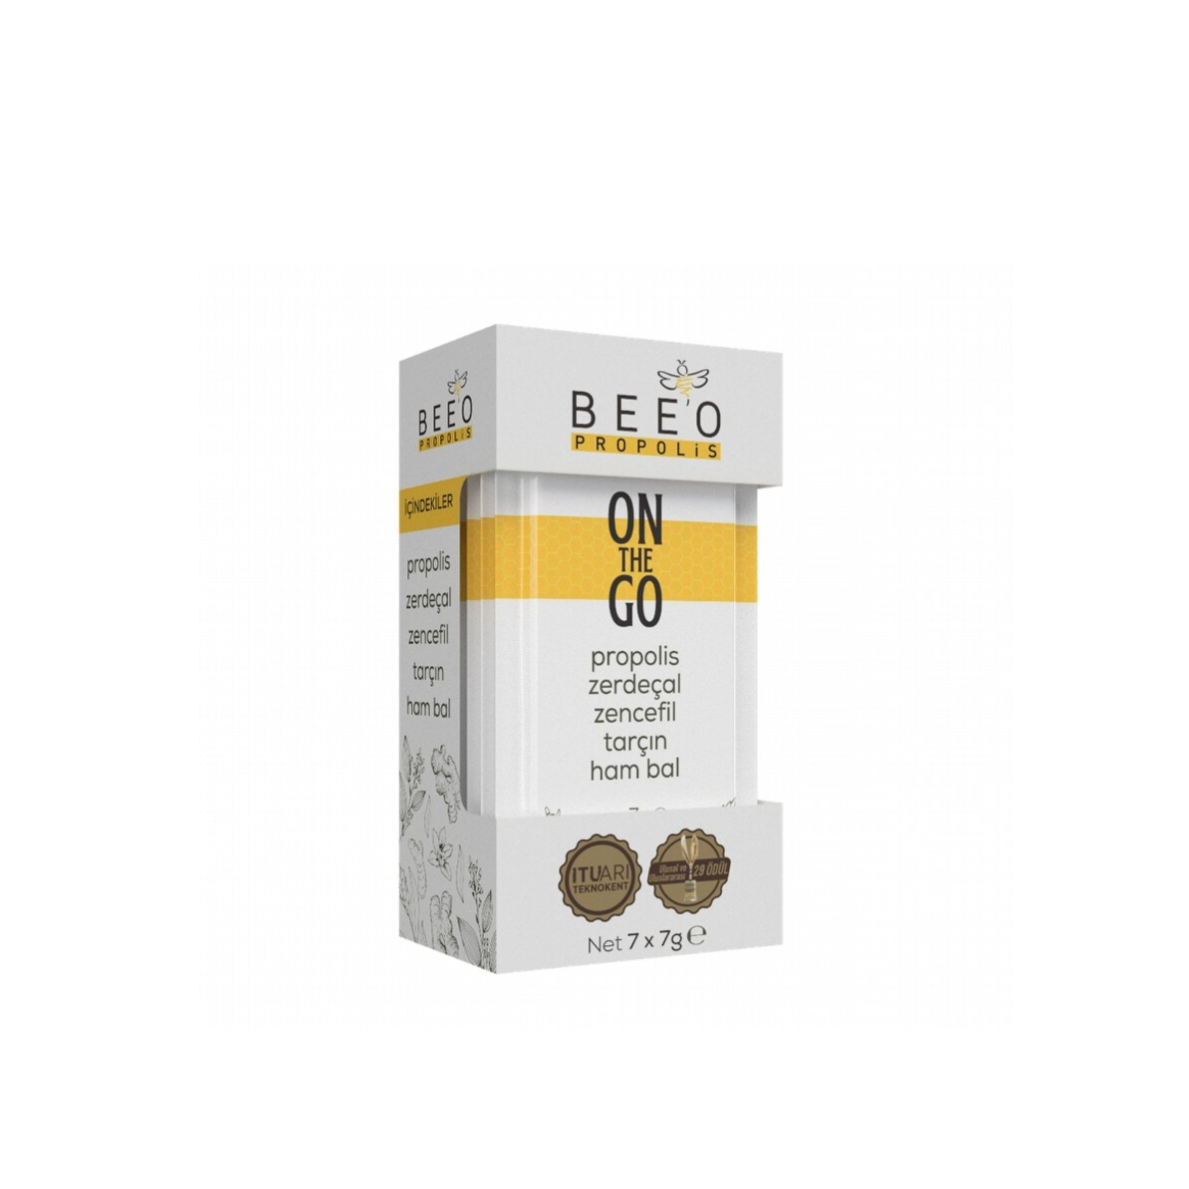 Bee'o on the go, Propolis, Ginger, Honey Mix and More.. 7 Pack